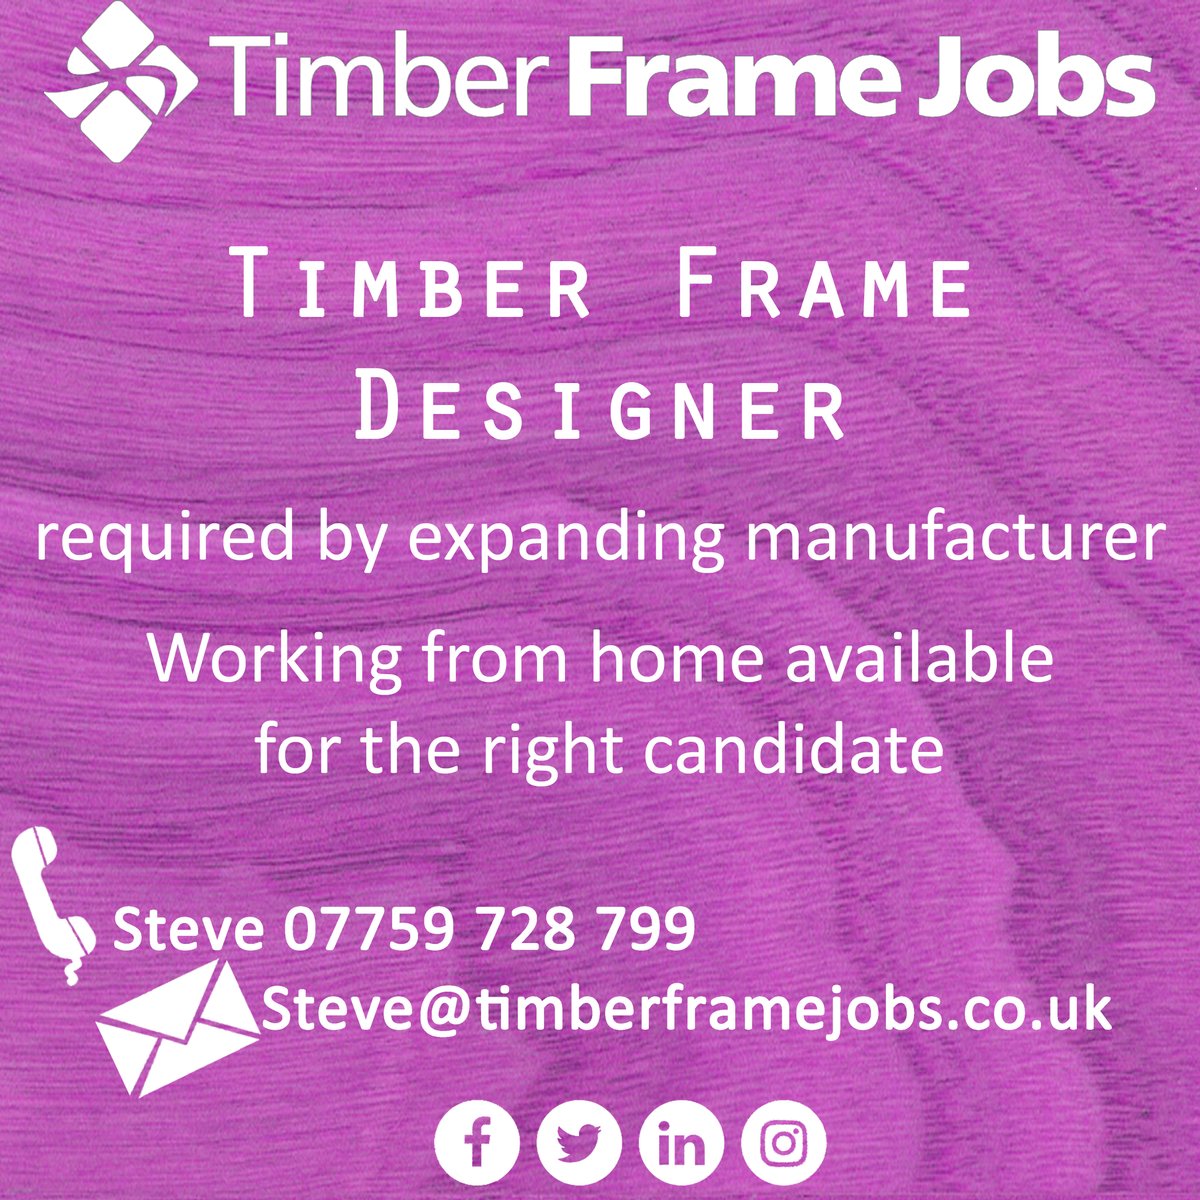 #TimberFrame designer required  by this award winning manufacturer. #WorkingFromHome available as an option for the right candidate. Hsbcad experience is preferable but not essential. Many other #TimberFrameJobs avail in UK & Ire Contact steve@timberframejobs.co.uk (07759) 728799